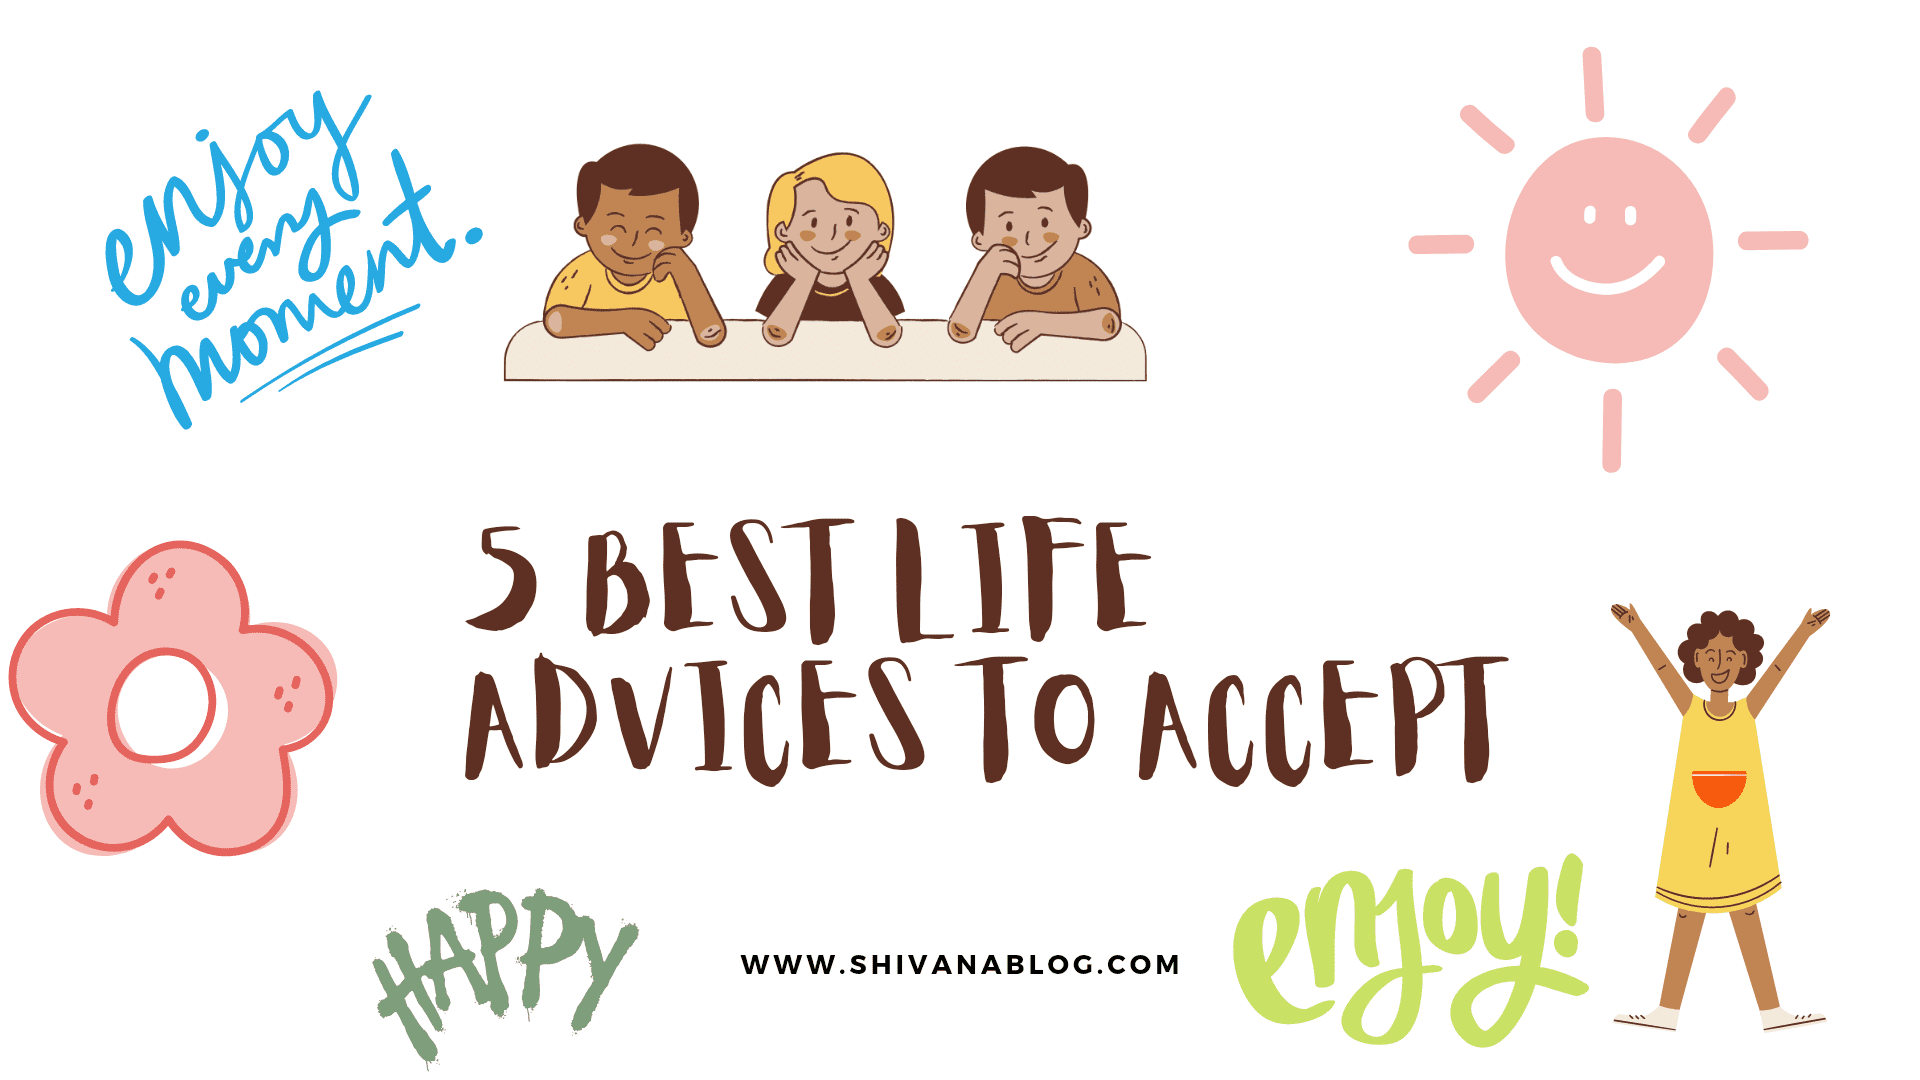 5 Best life advices to accept